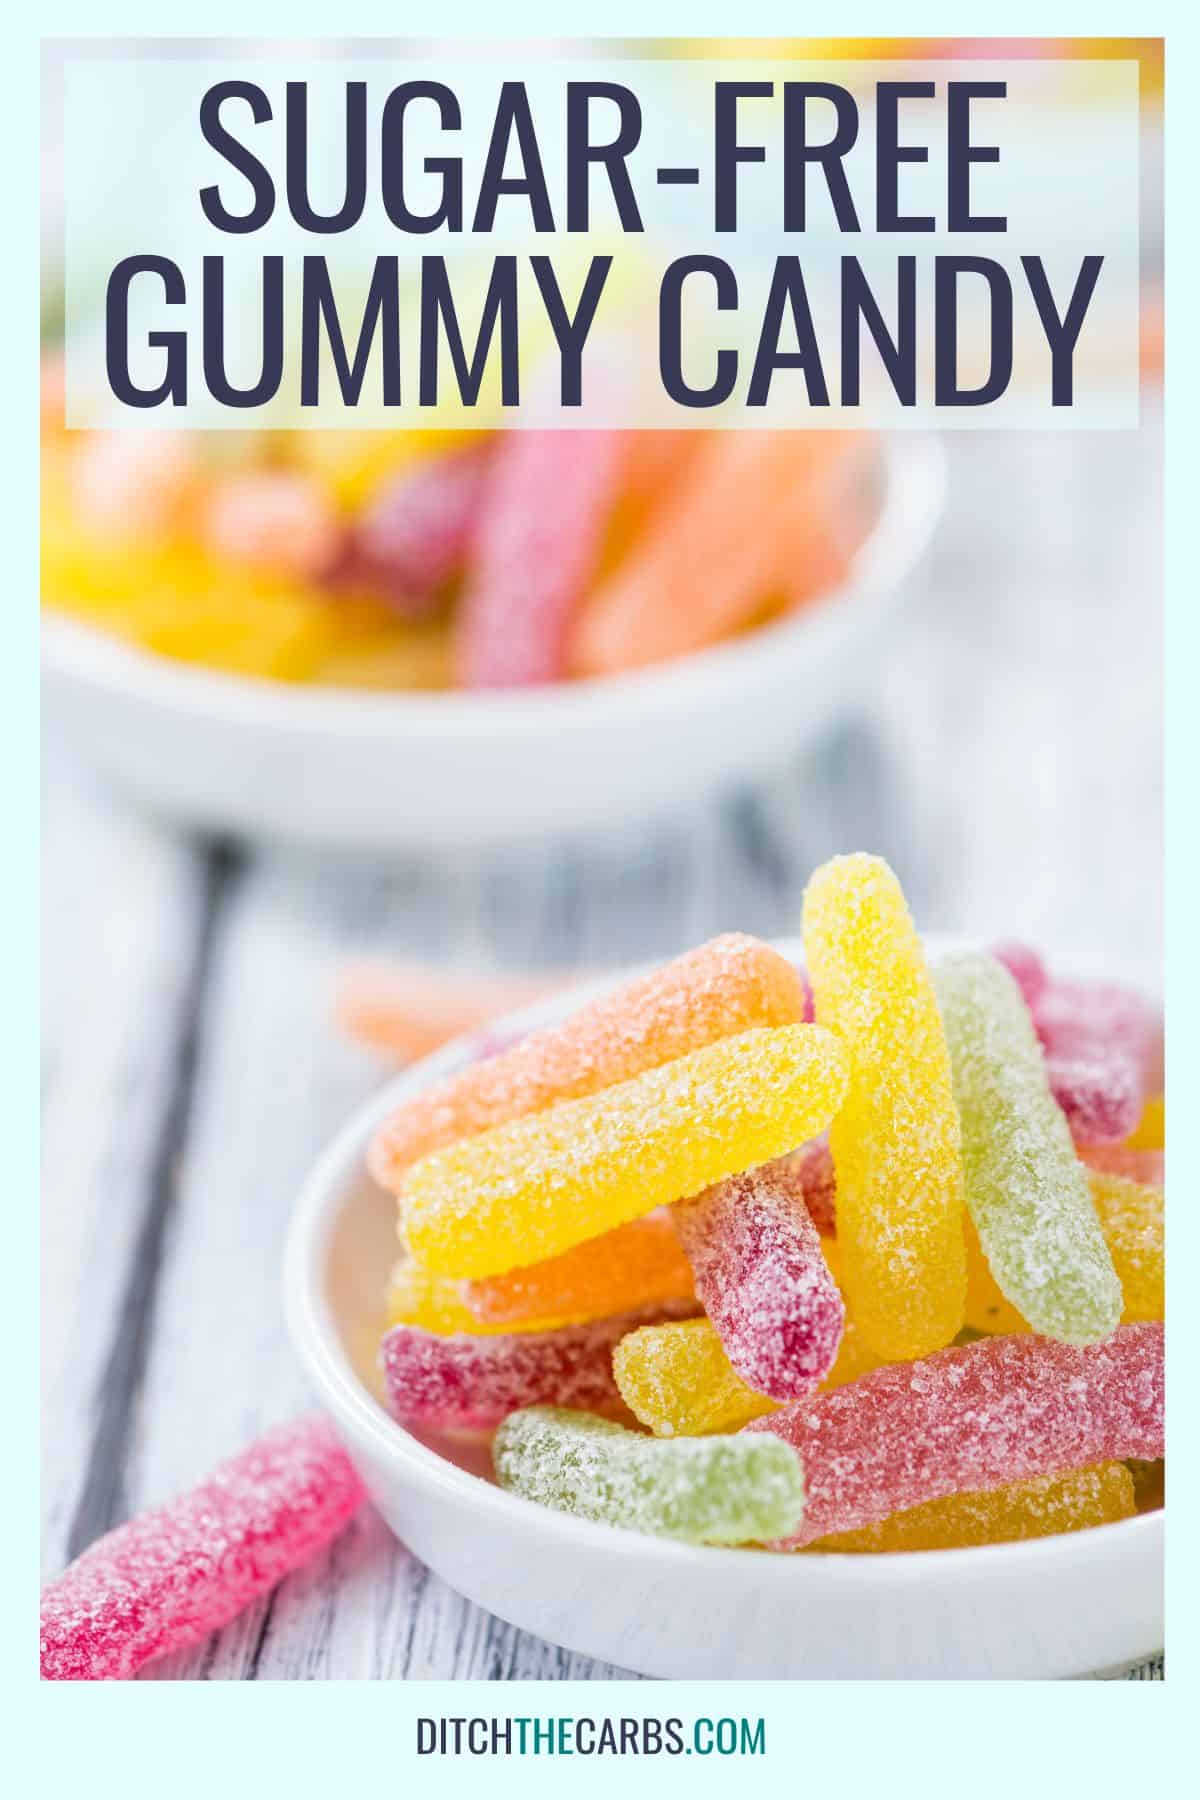 sour sugar-free gummy candy on a plate